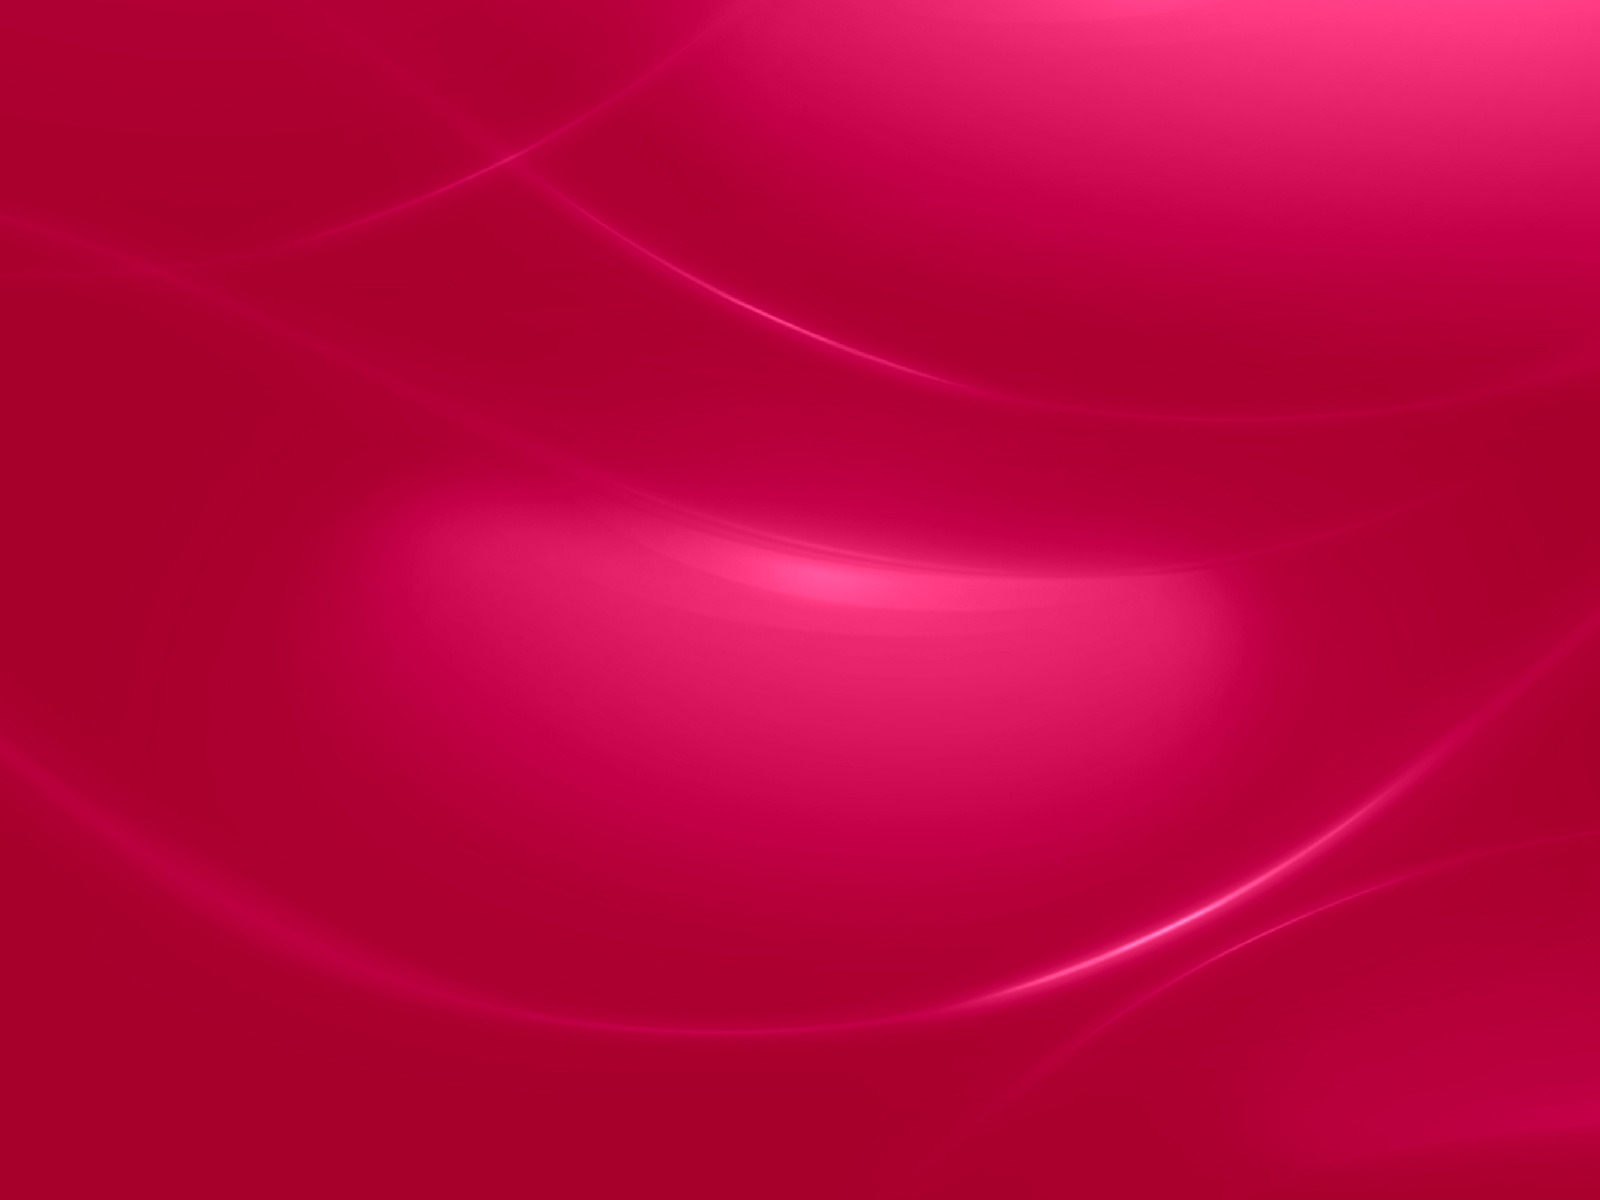 Minimal Pink Waves for 1600 x 1200 resolution